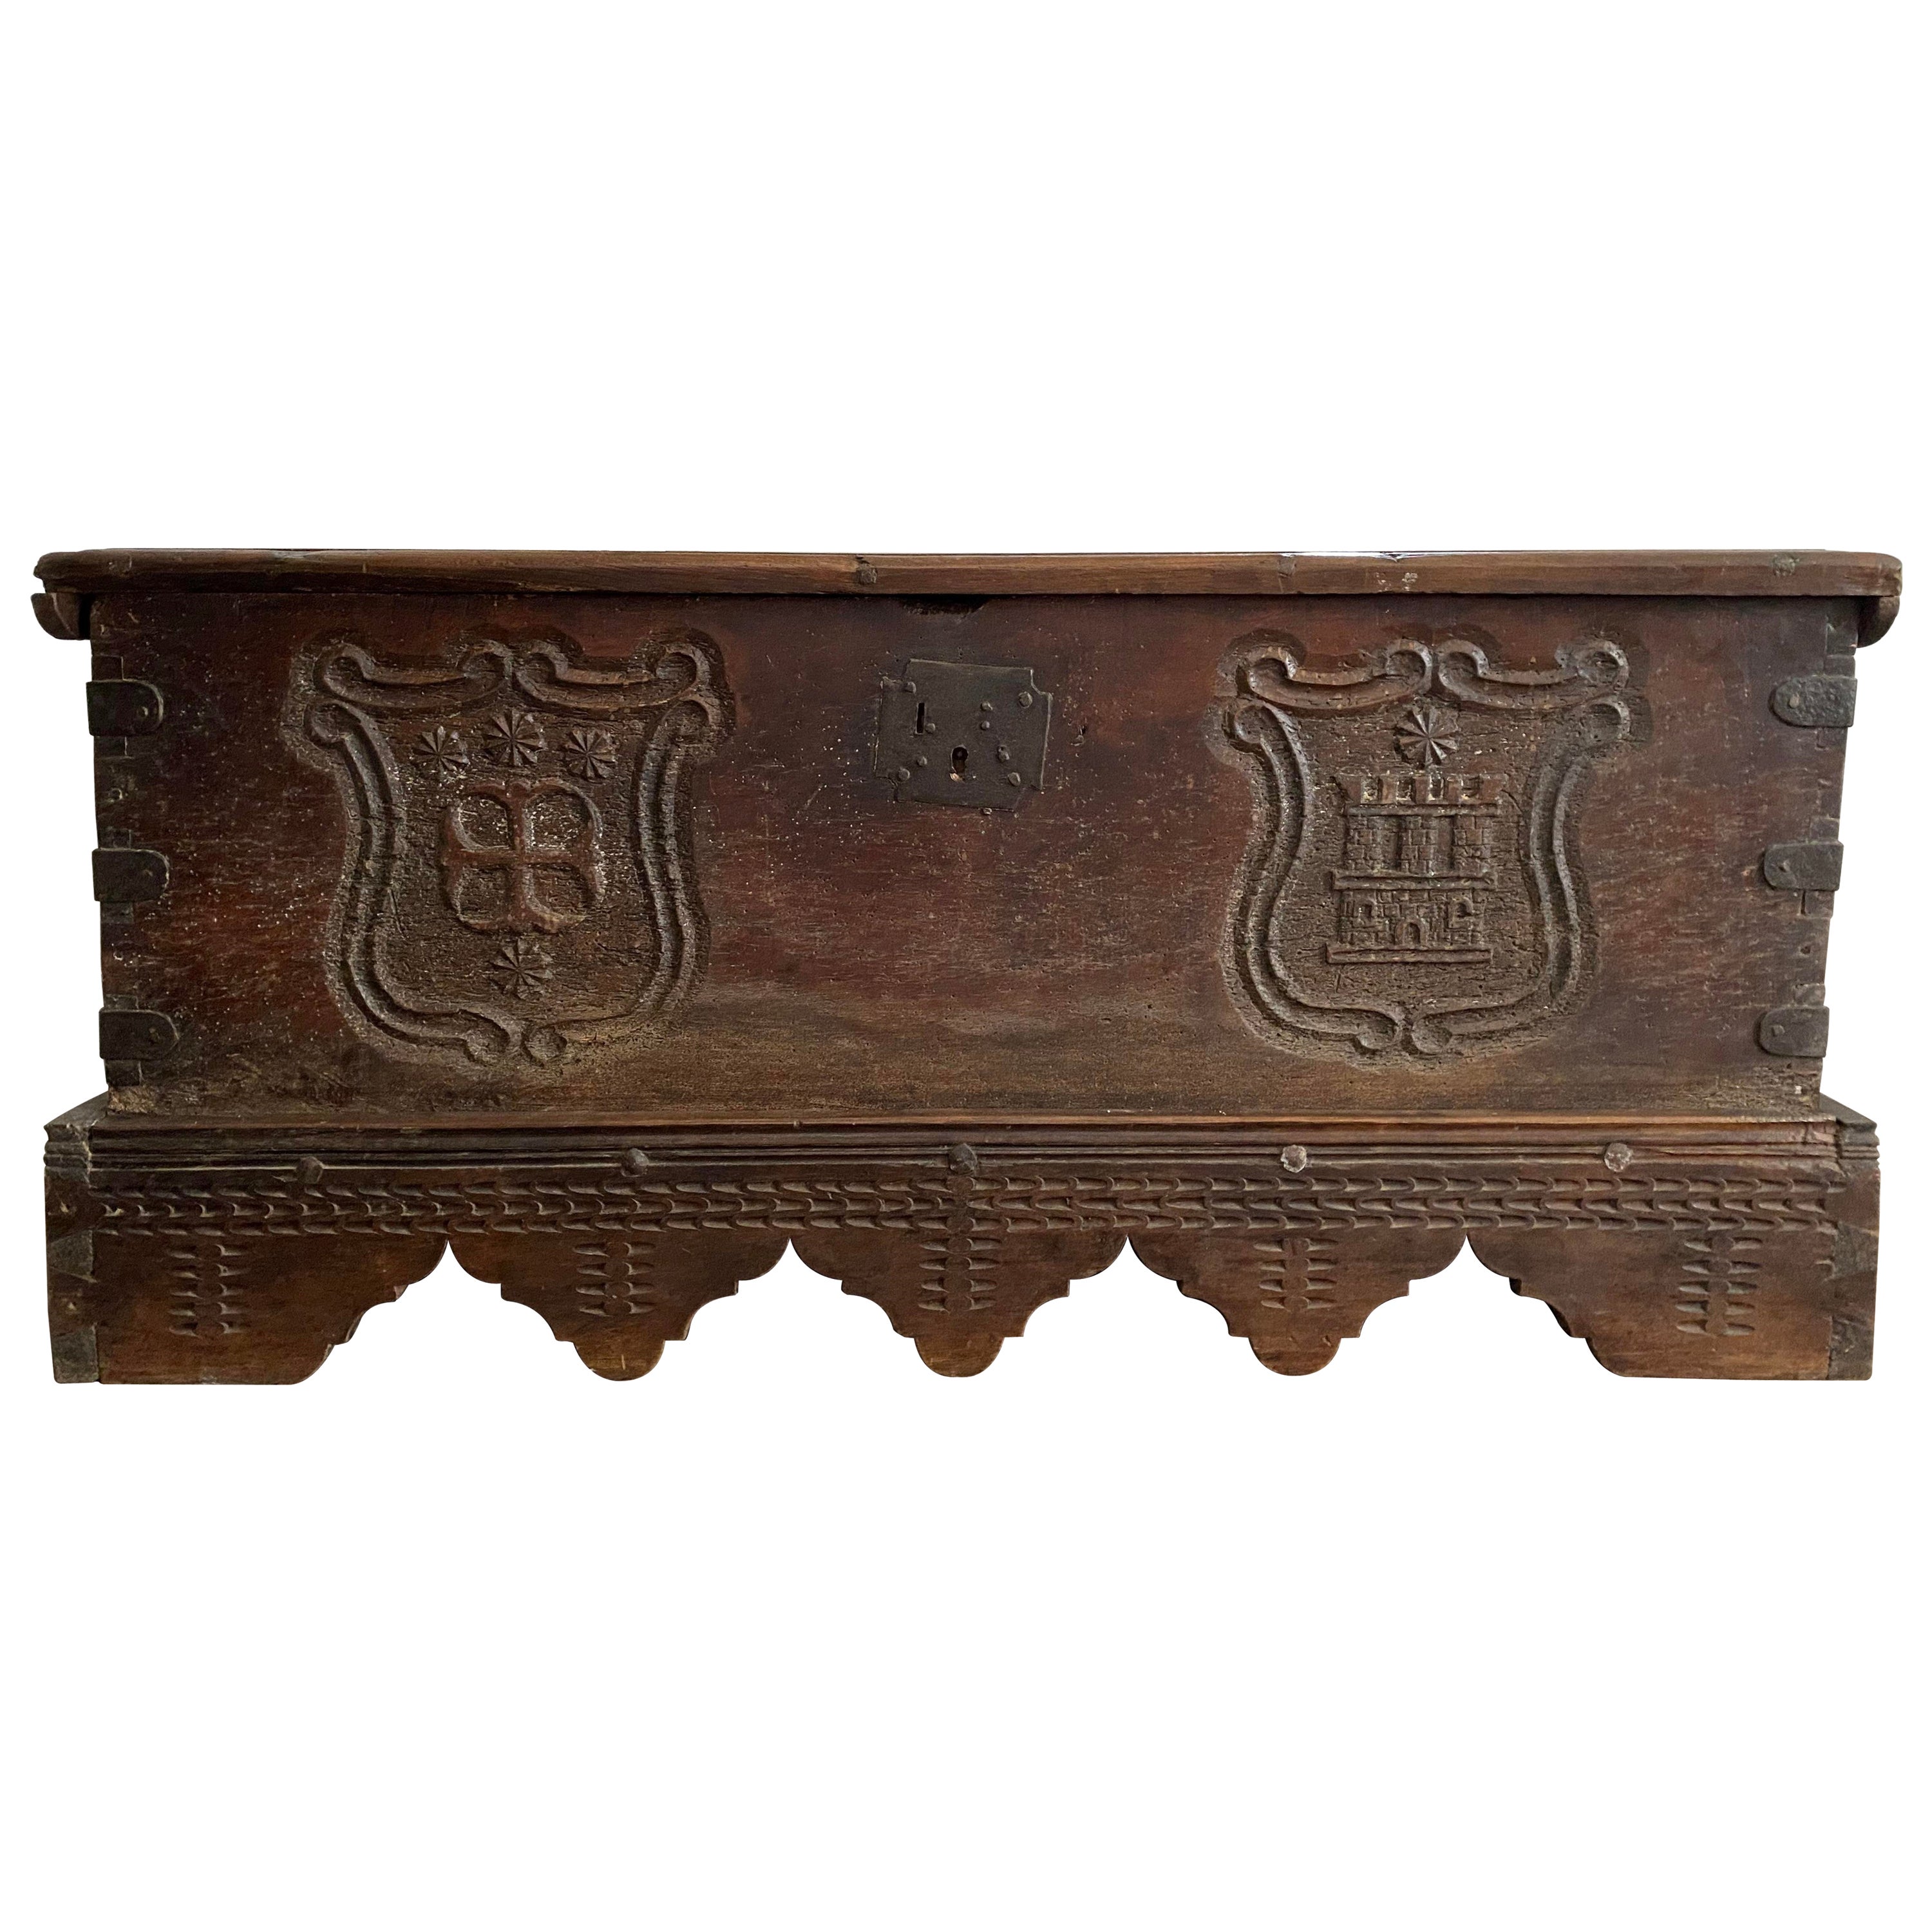 Wedding trunk / chest with coat of arms - Renaissance - 1600